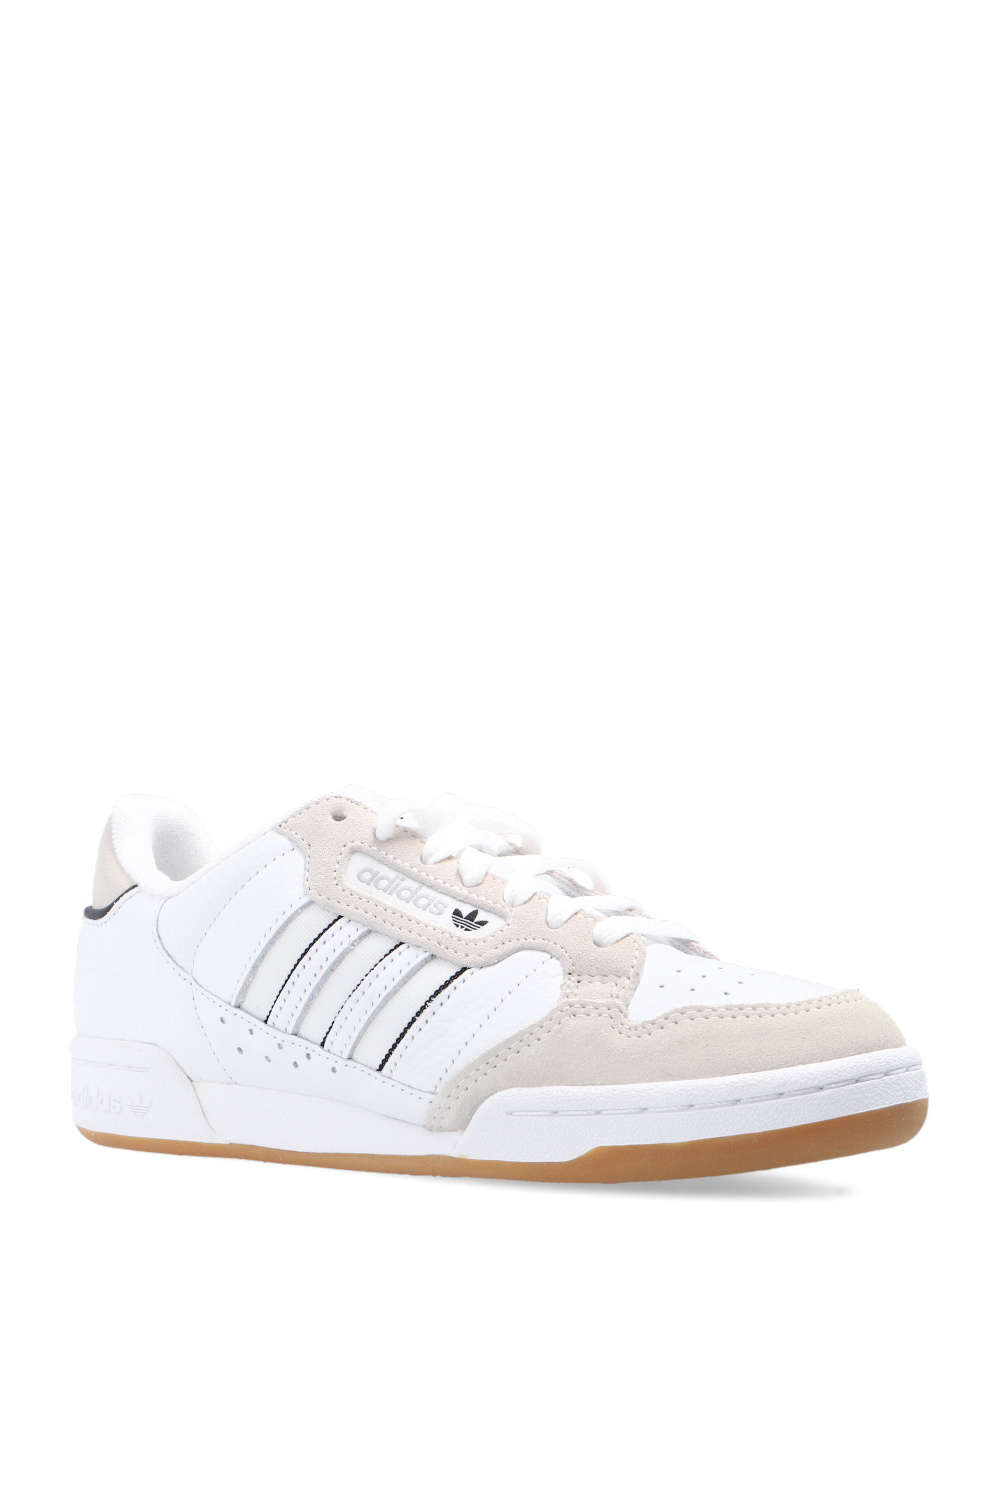 champion x adidas nmd boost xr_1 white | IetpShops | Women's Shoes | ADIDAS  Originals 'Continental 80 Stripes' sneakers